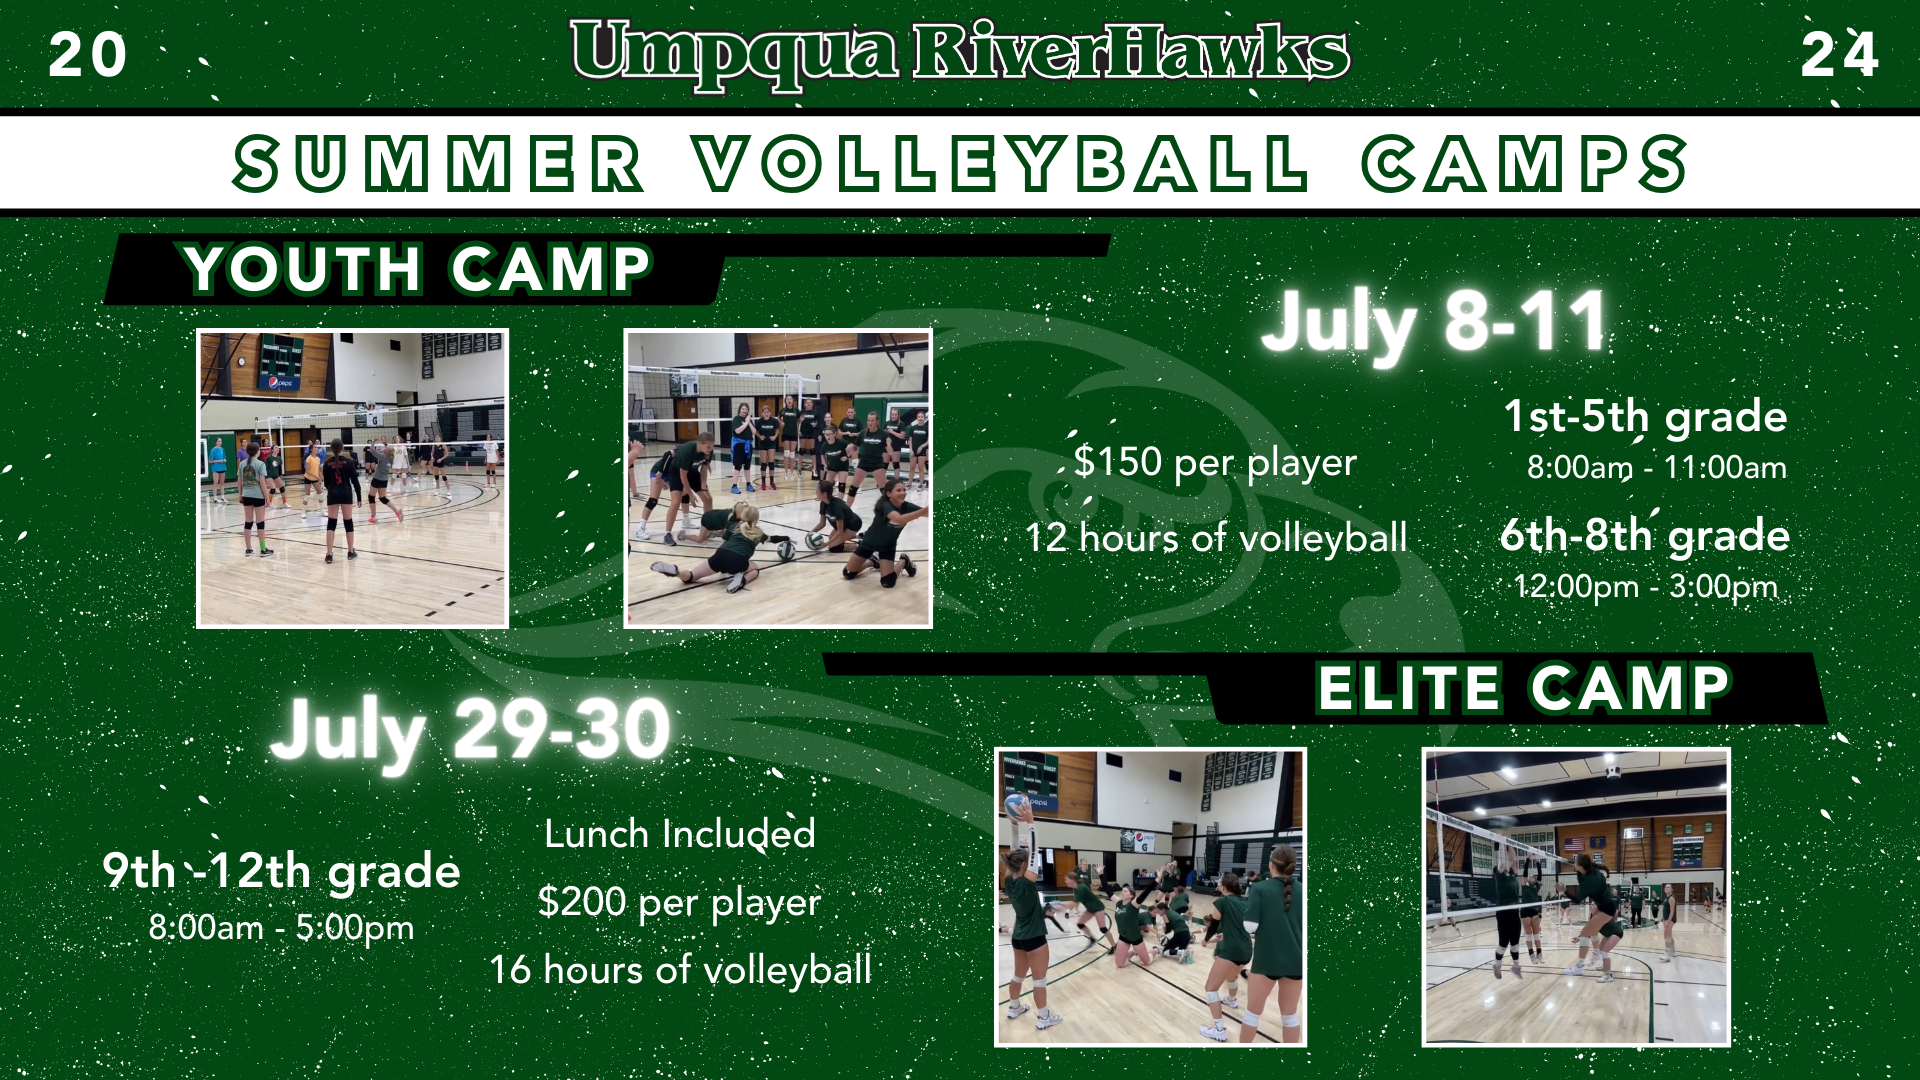 RiverHawks Announce Summer Volleyball Camps